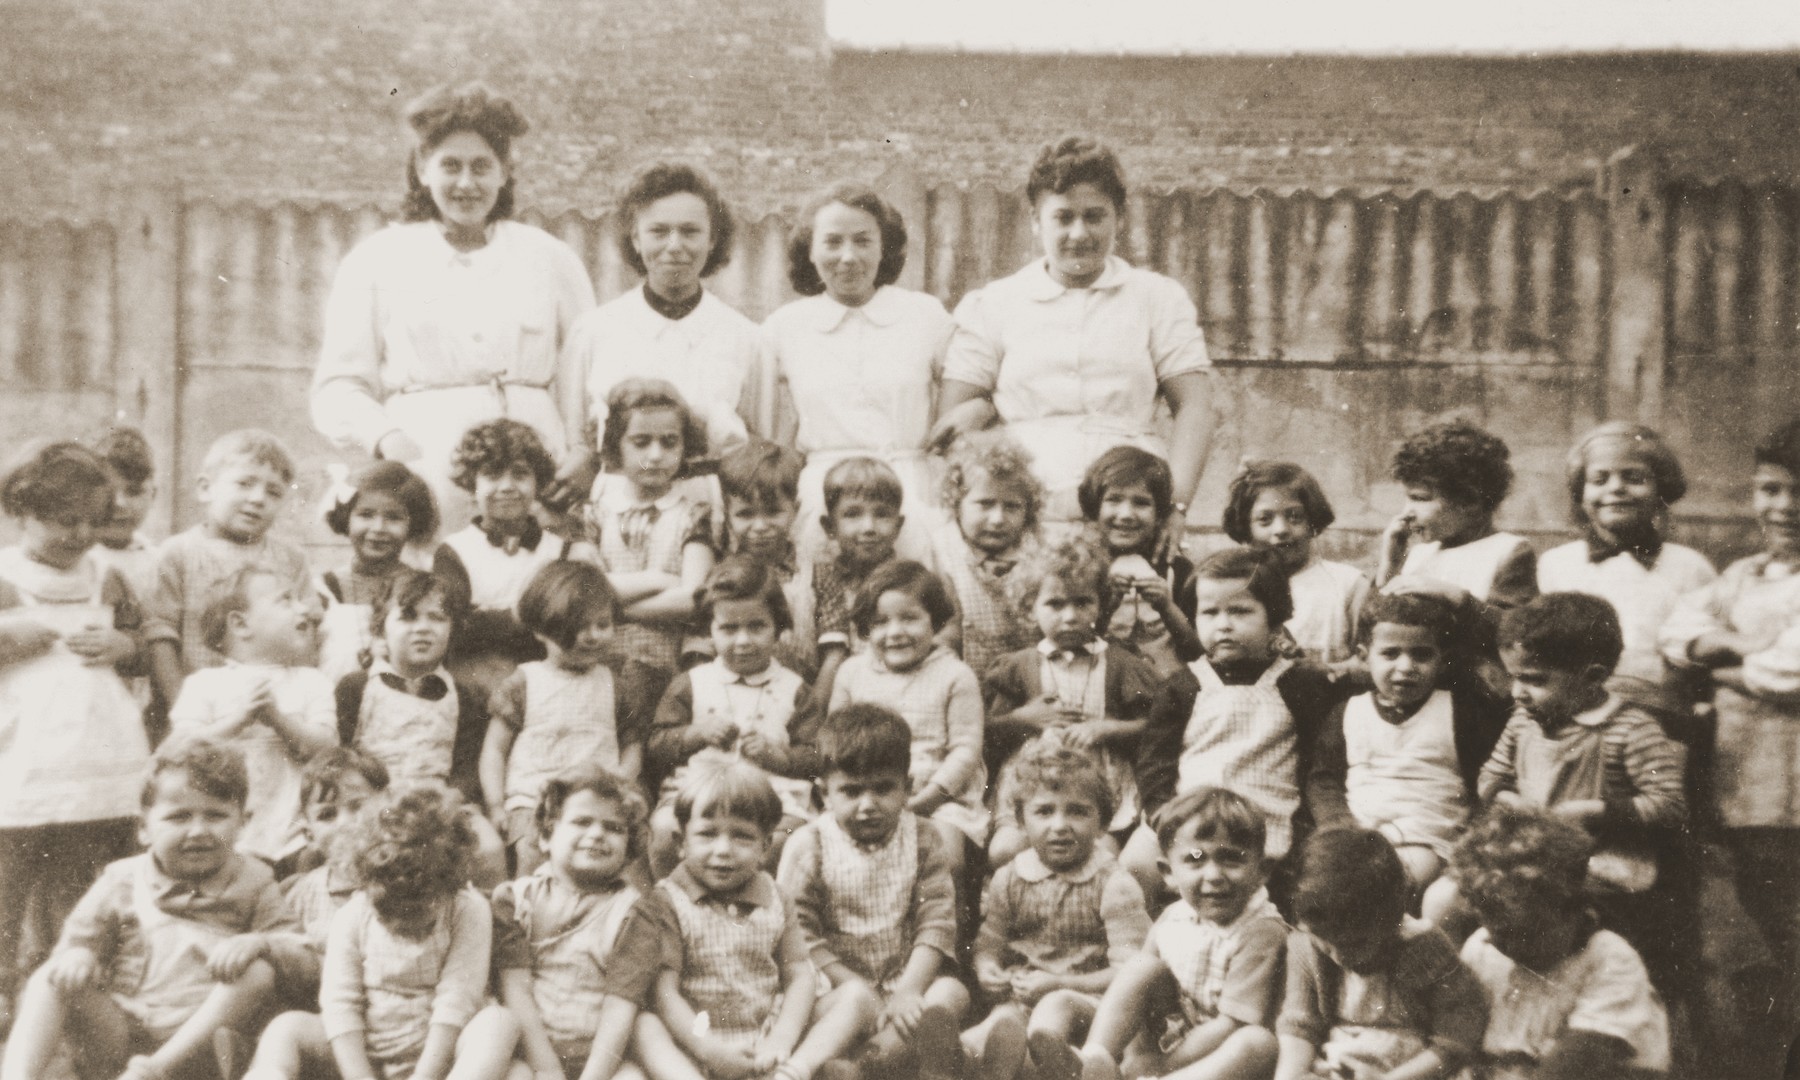 Group portrait of the children and staff of La Pouponniere children's home in Uccle.

Among those picutred in the first row is Sylvain Borisewitz.

Among thos pictuted in the first row is Sylvain Borisewitz (fifth from the left).

Pictured in the second row (4th, 3rd, and 2nd from the right) are Paula Bucholc, Jeannette Schindelheim (Oselka-Korn), and DeeDee (Edith Richter).

Pictured in the third row are Sarah Buchholc (later Suzy Eliya, sixth from the right) and Bernard Baron (now Bill Frankenstein, seventh from the right).